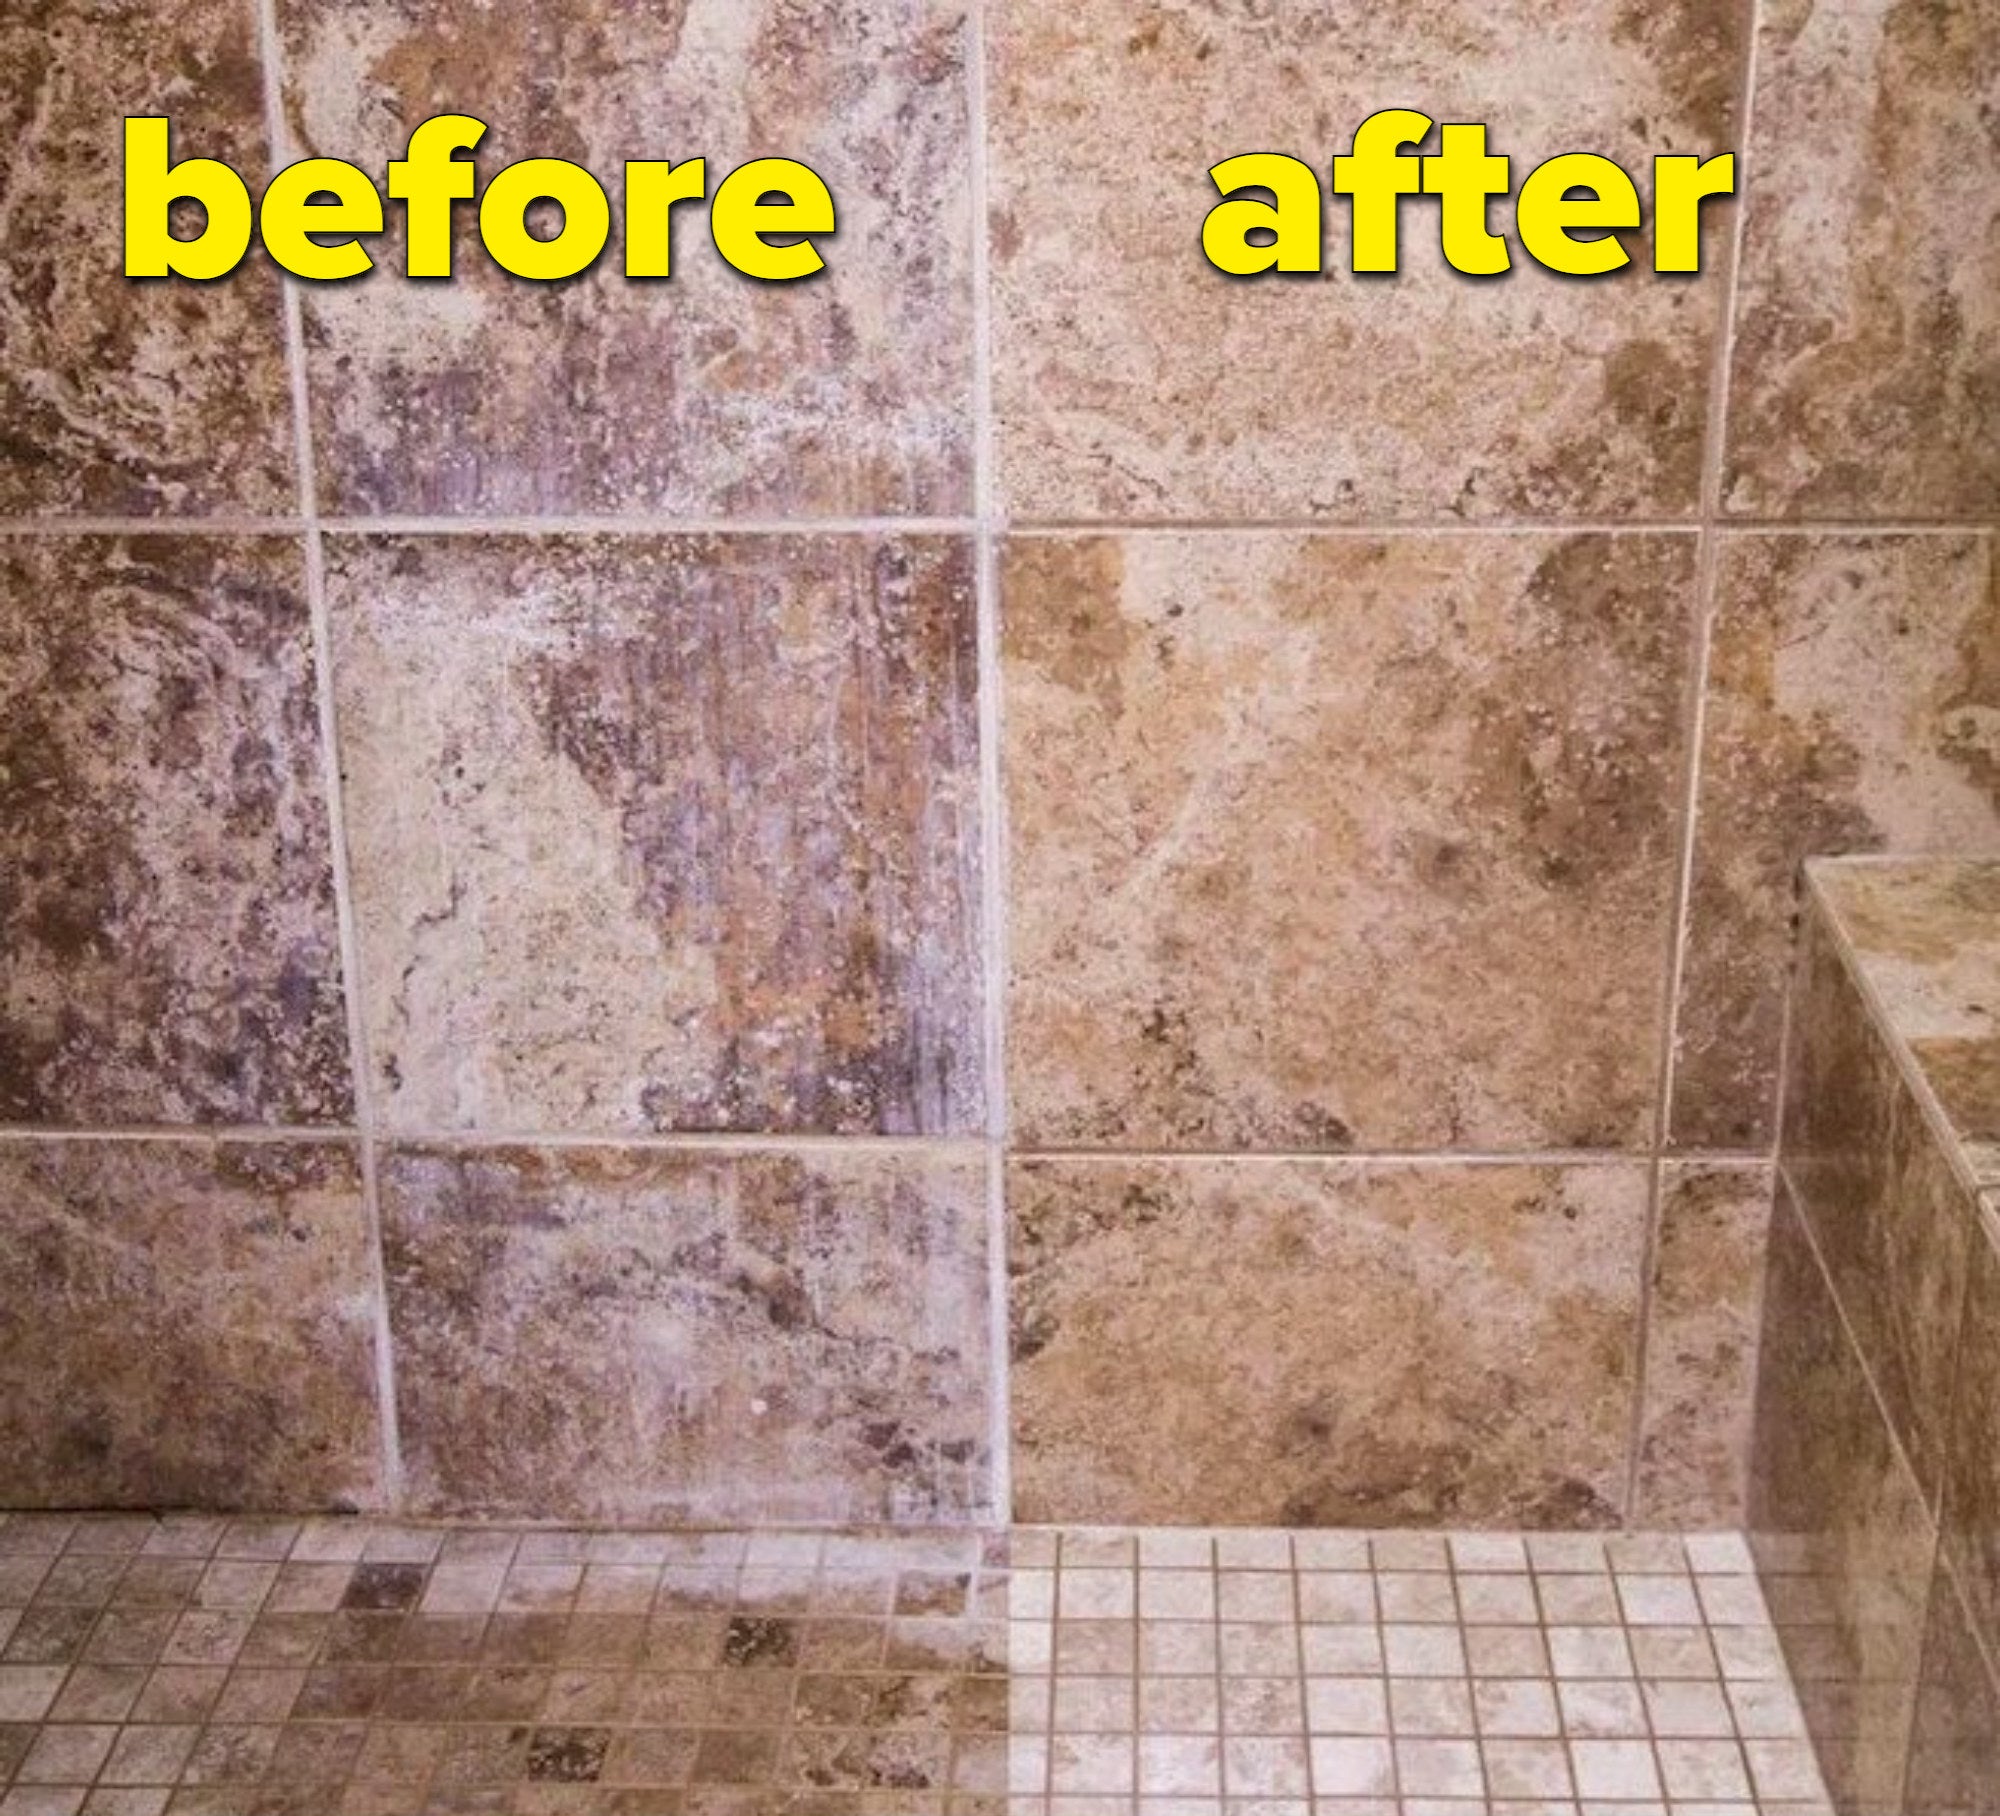 A before (left) and after (right) showing the stains removed from the shower